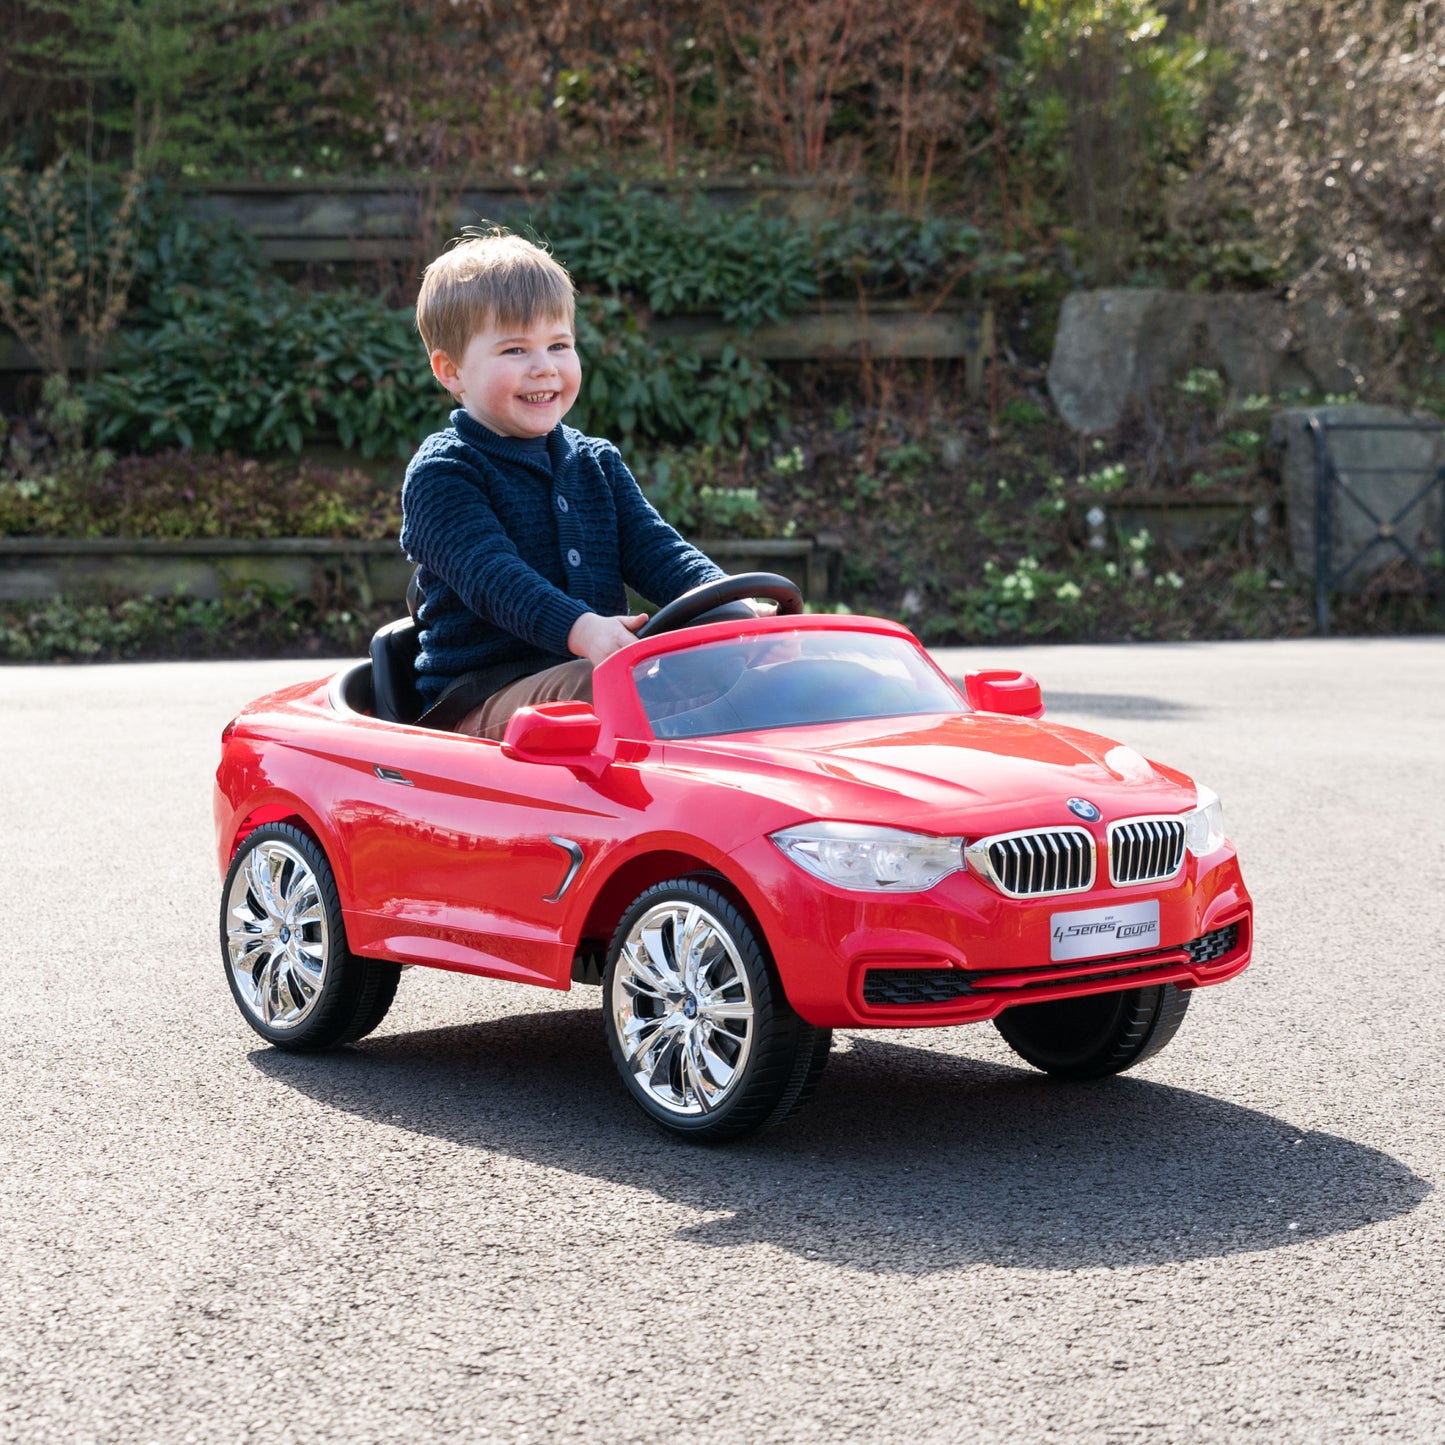 XOOTZ® - TY6014RD - BMW 4 SERIES ELECTRIC RIDE ON RED - Rich Kids Playground